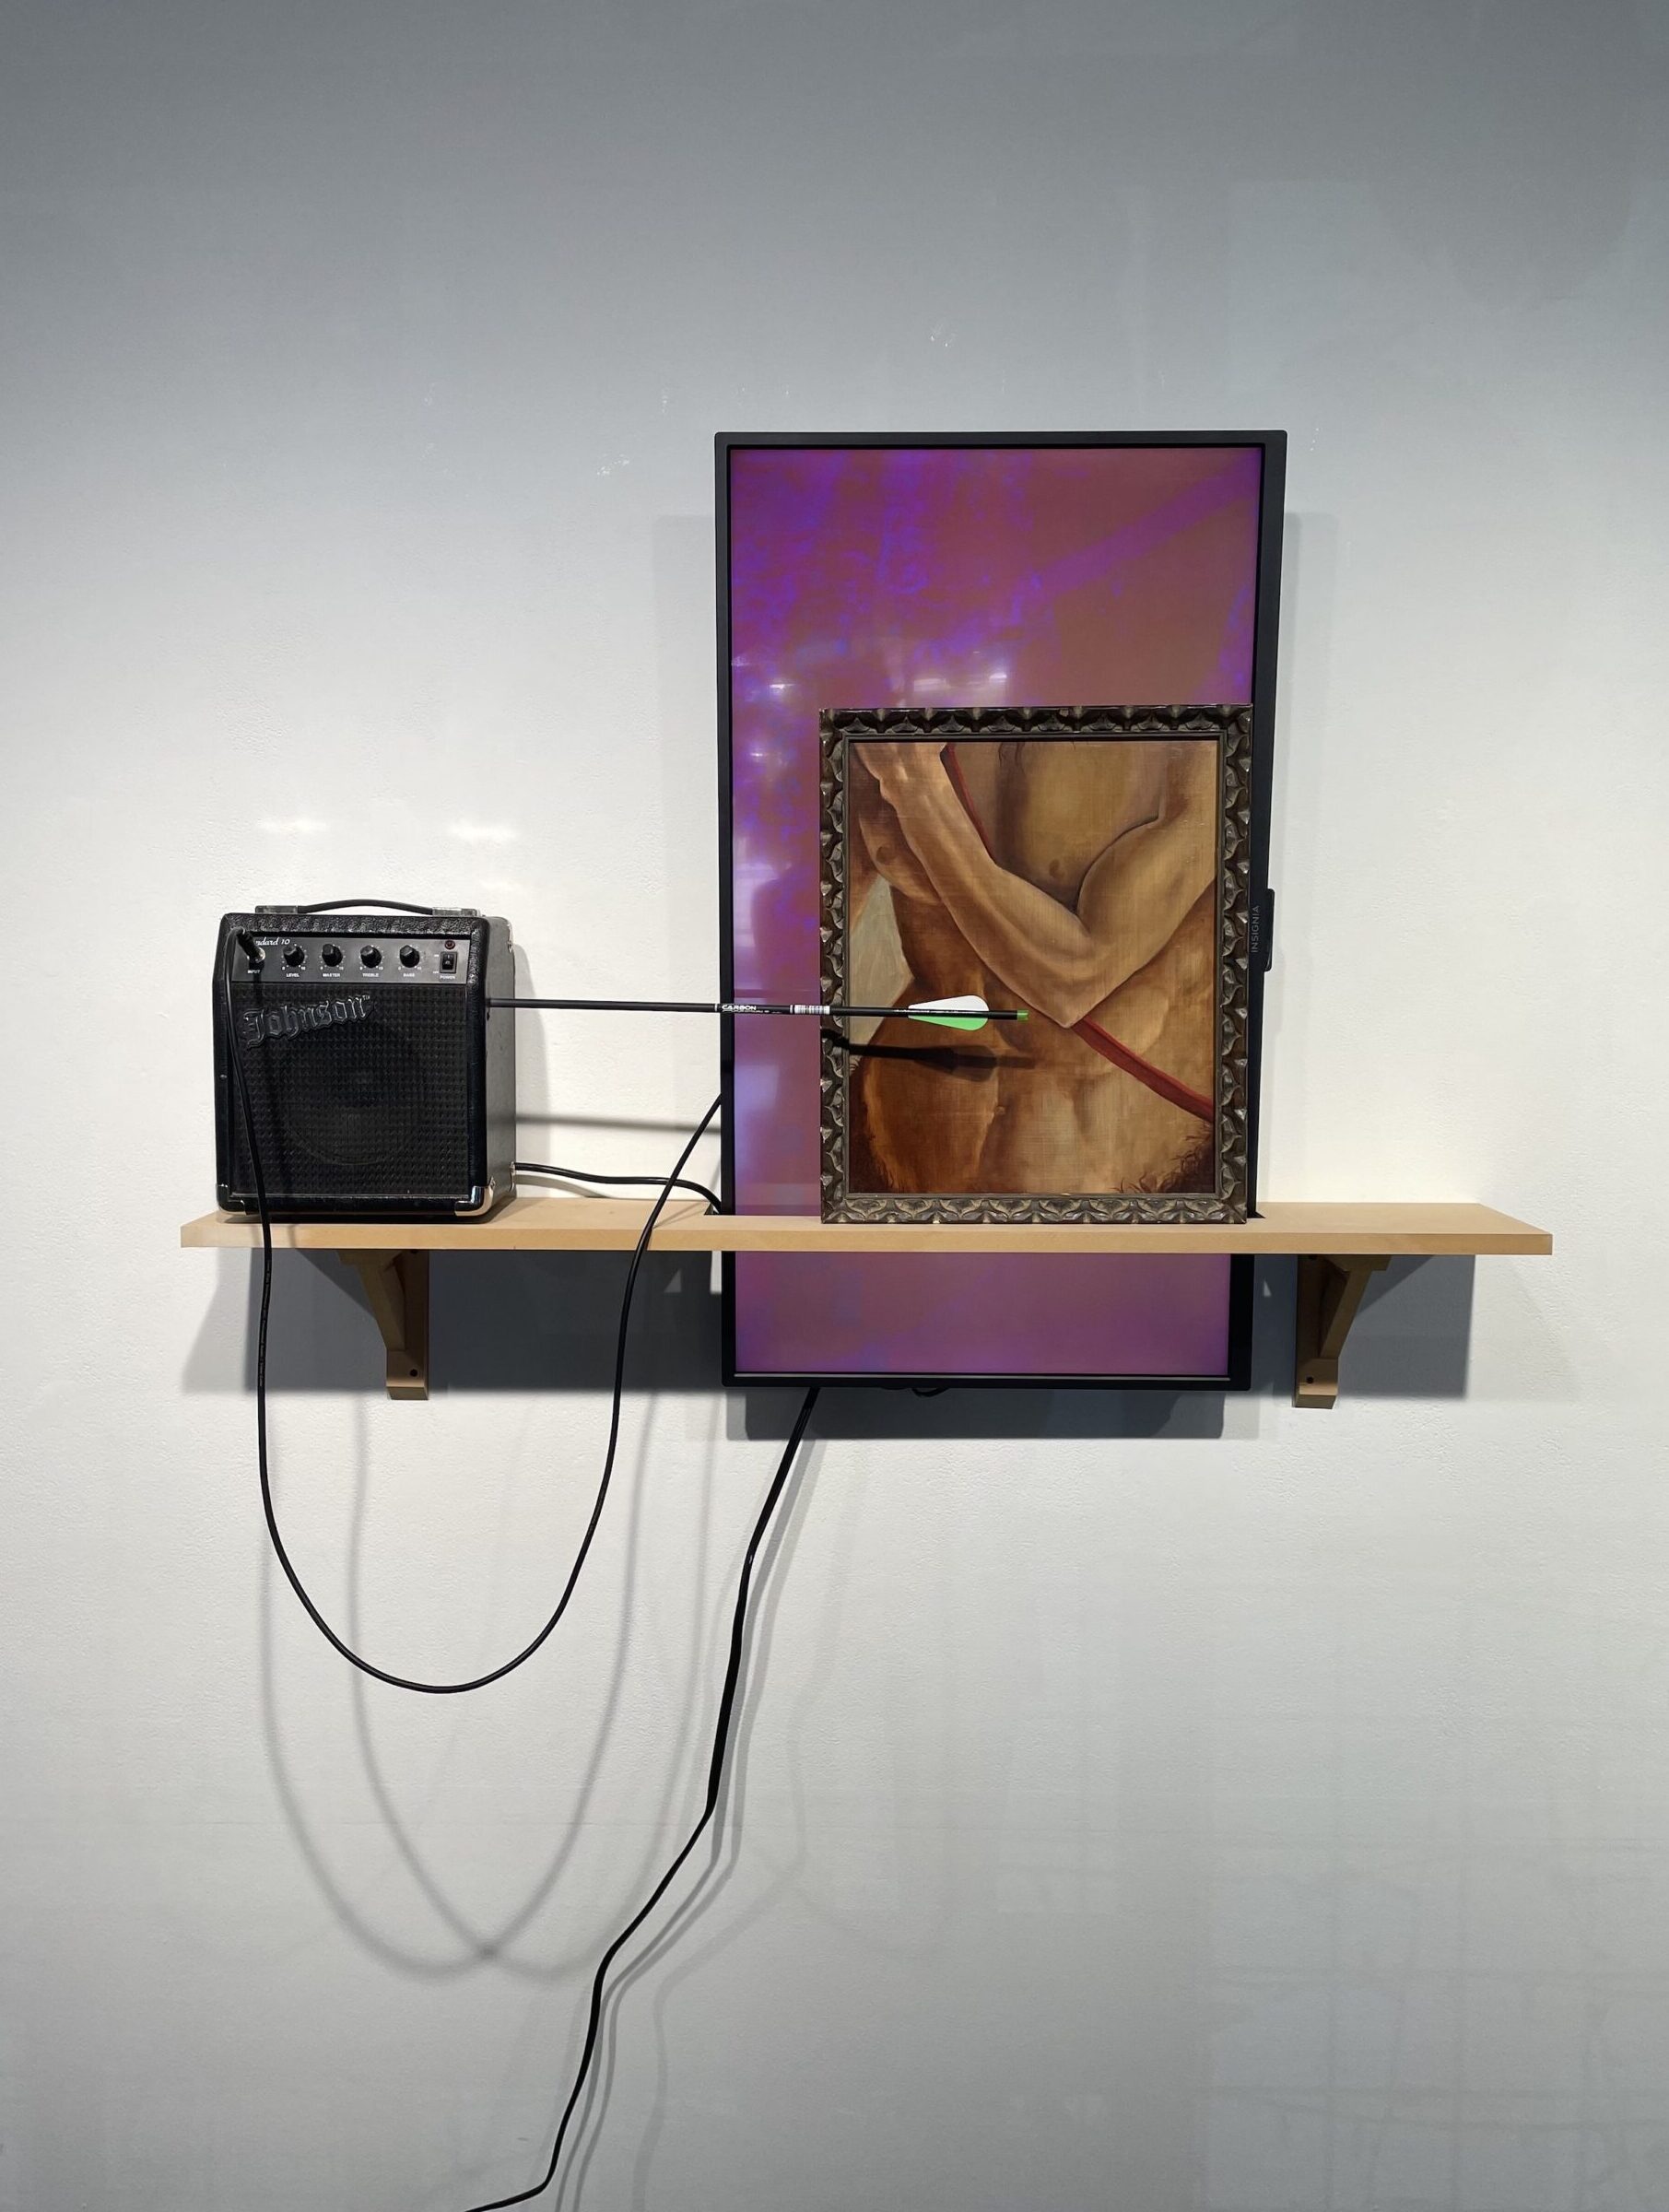 Joe Hedges's "Centaurs" features a guitar amplifier, a television with video, and an oil painting on canvas.